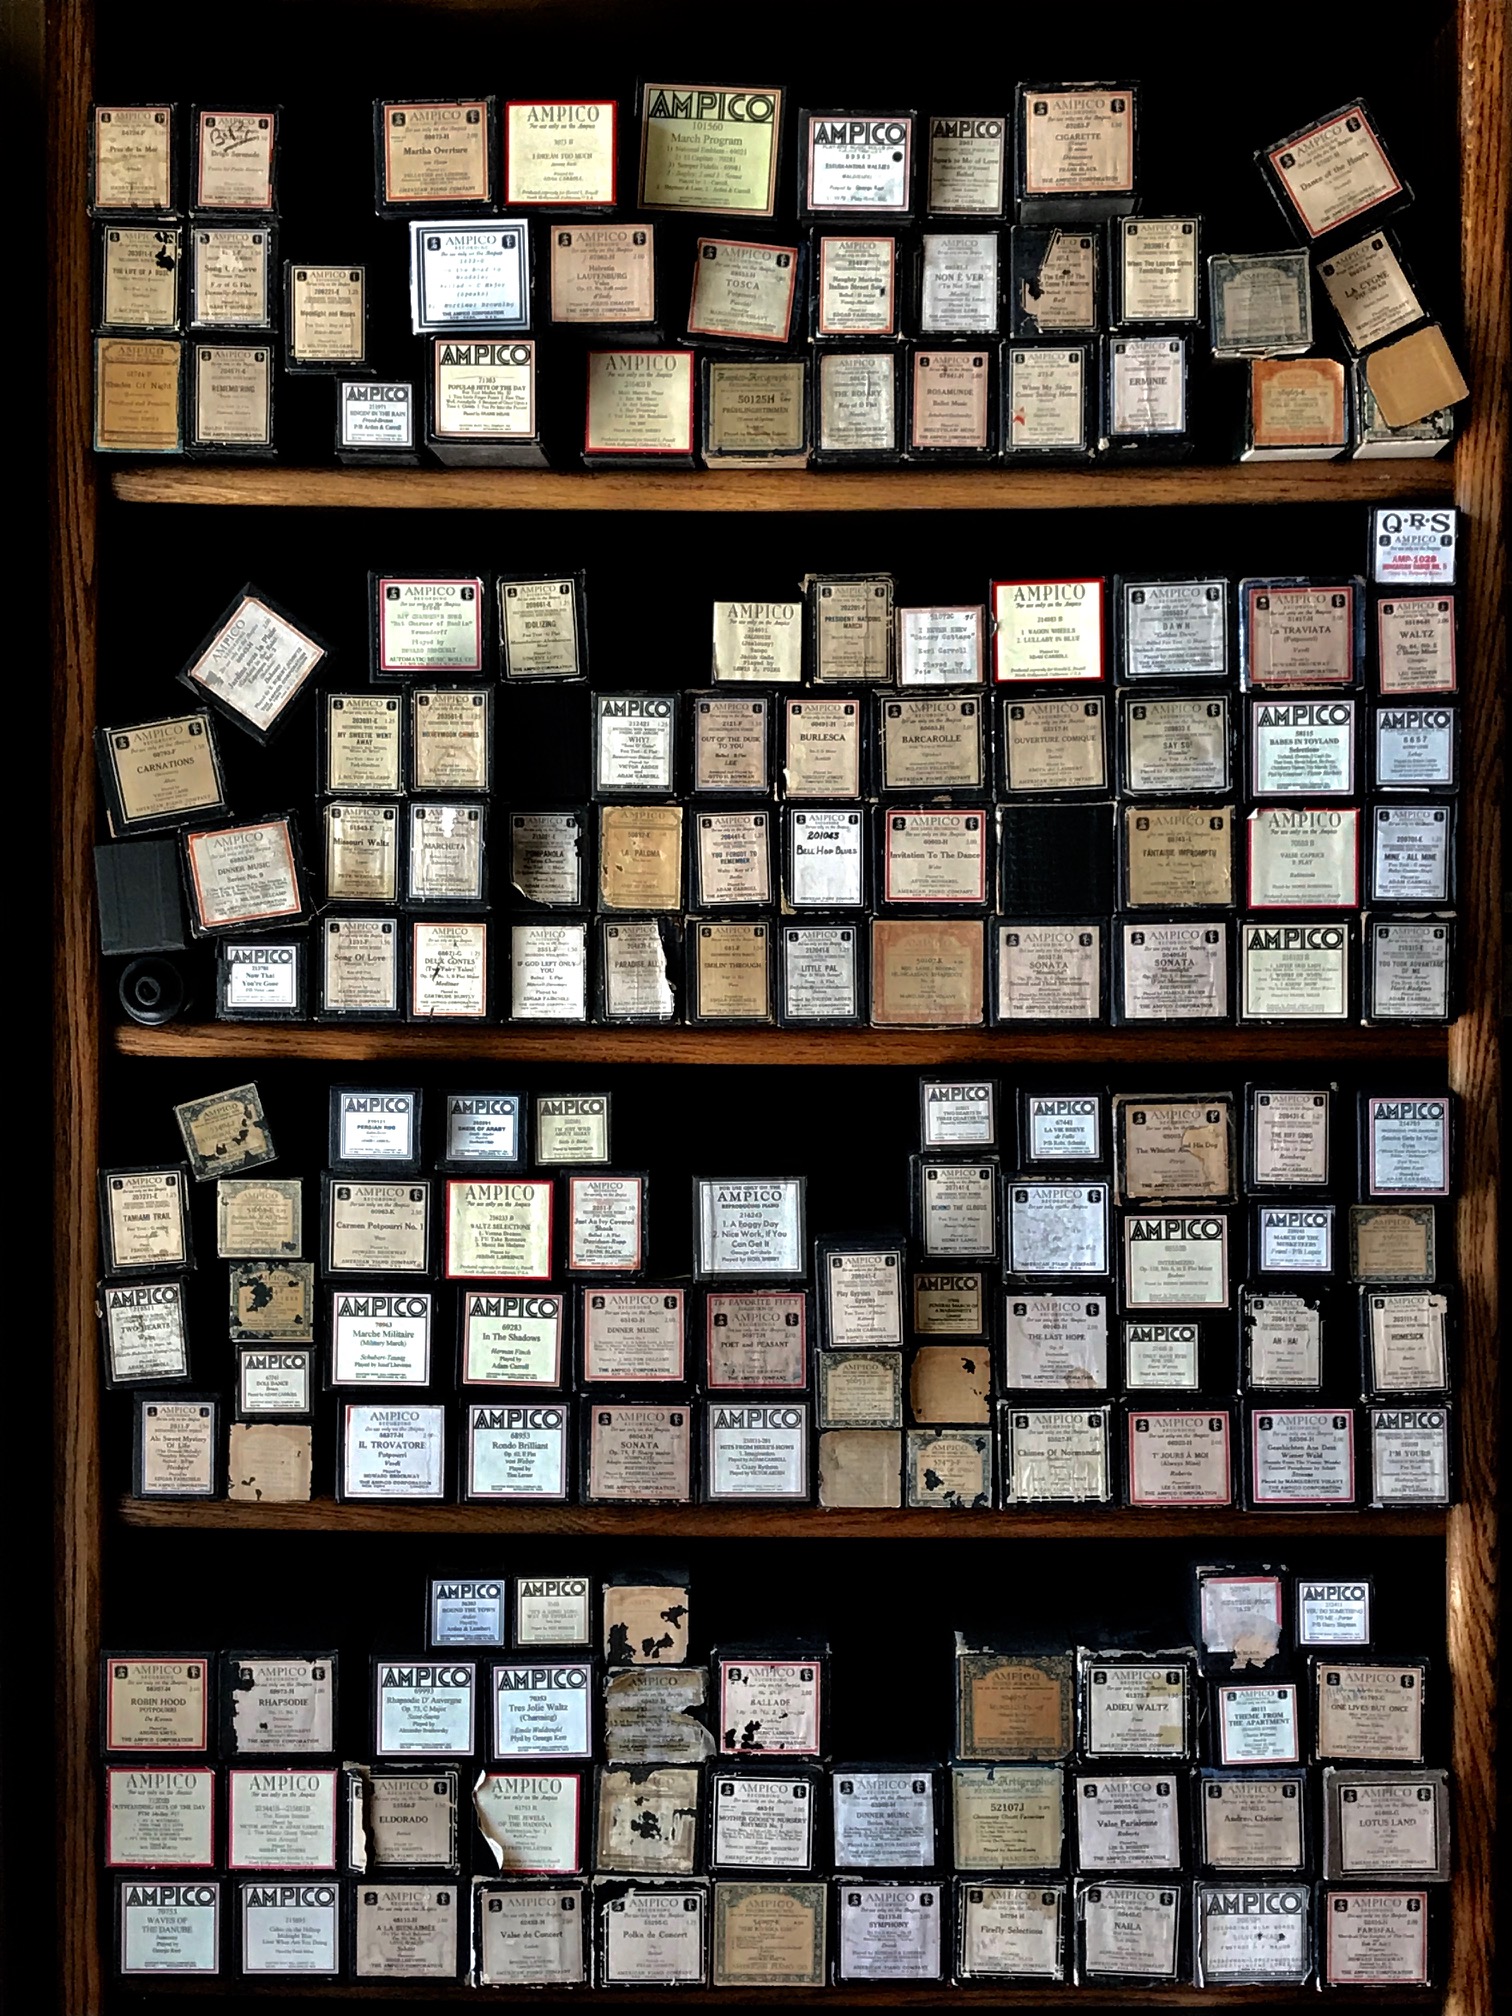 Bookcases around the restaurant are stocked with hundreds of player piano rolls.